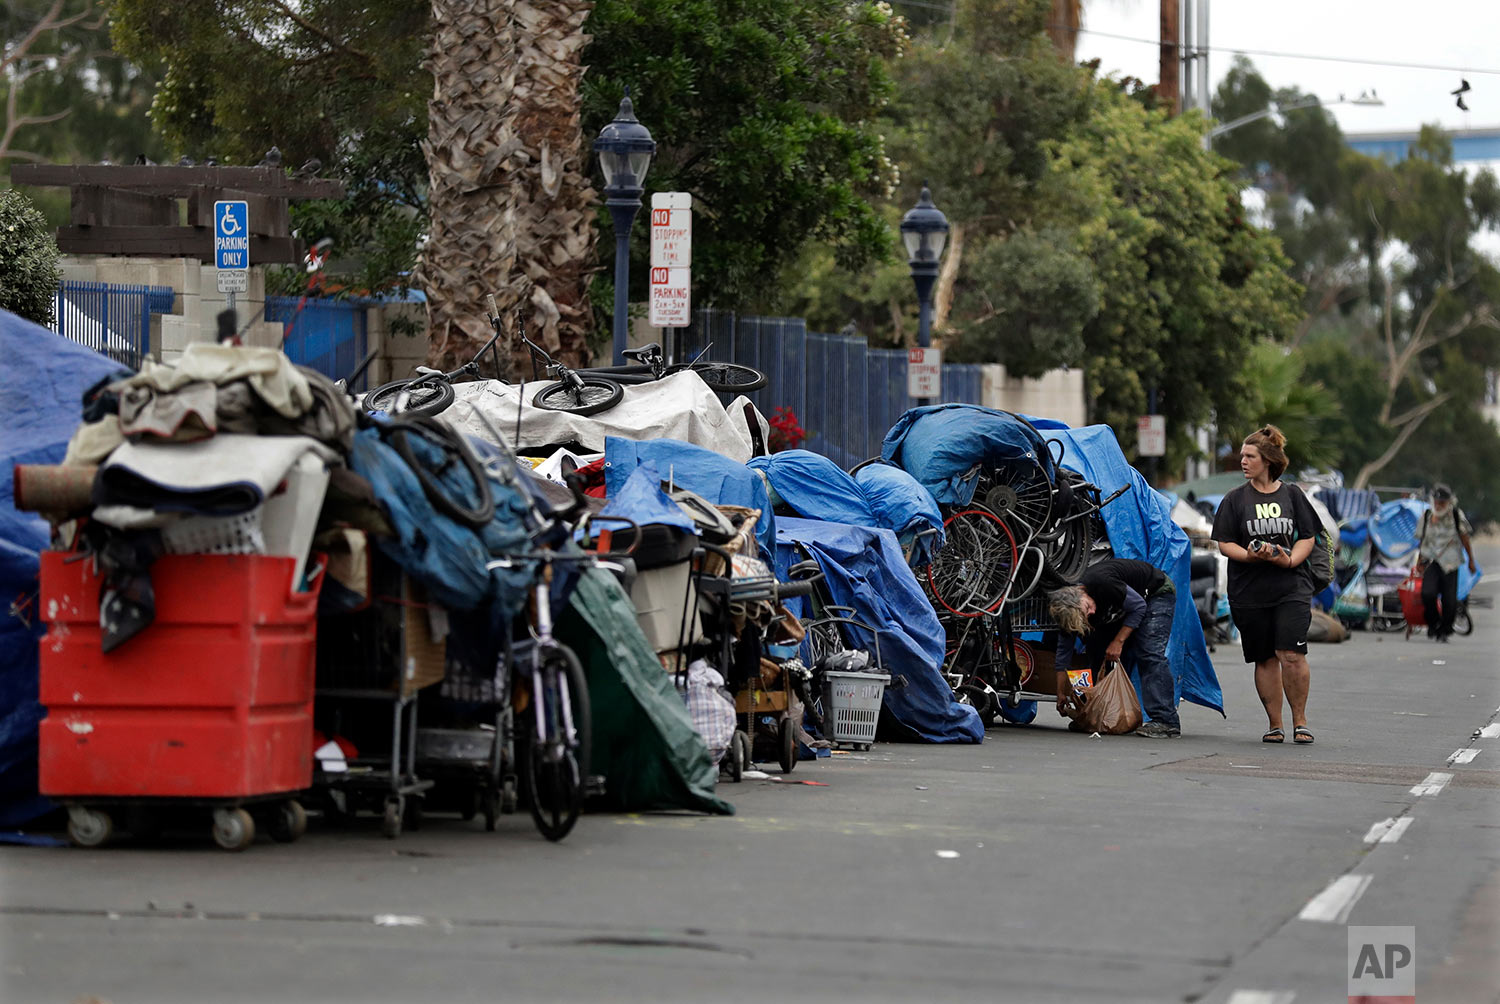  In this Sept. 19, 2017 photo, trash from homeless encampments lines a street in San Diego. In a place that bills itself as “America’s Finest City,” renowned for its sunny weather, surfing and fish tacos, spiraling real estate values have contributed to spiraling homelessness in San Diego. Most alarmingly, the explosive growth in the number of people living outdoors has contributed to a hepatitis A epidemic.  (AP Photo/Gregory Bull) 